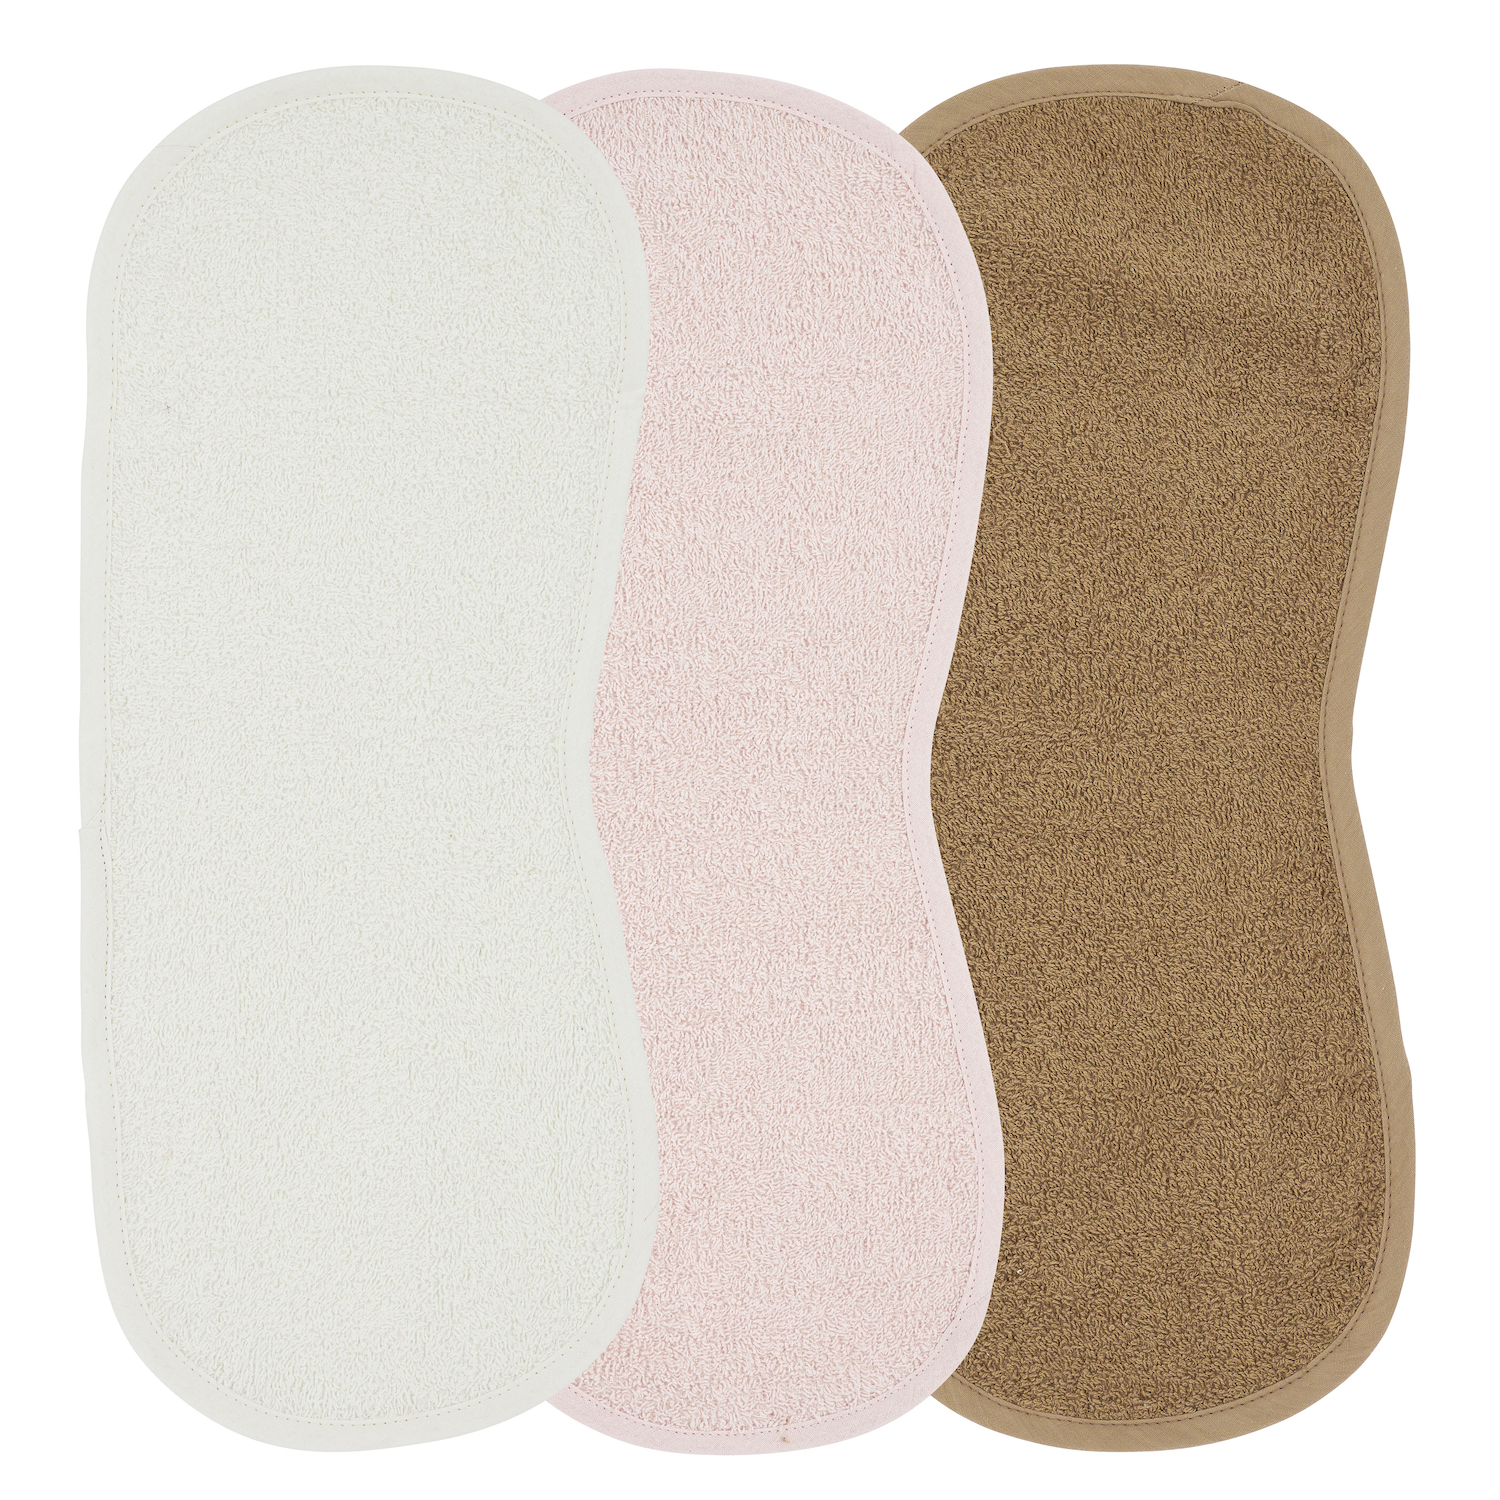 Spucktuch XL Frottee 3-pack  - Offwhite/Soft Pink/Toffee - 53x20cm